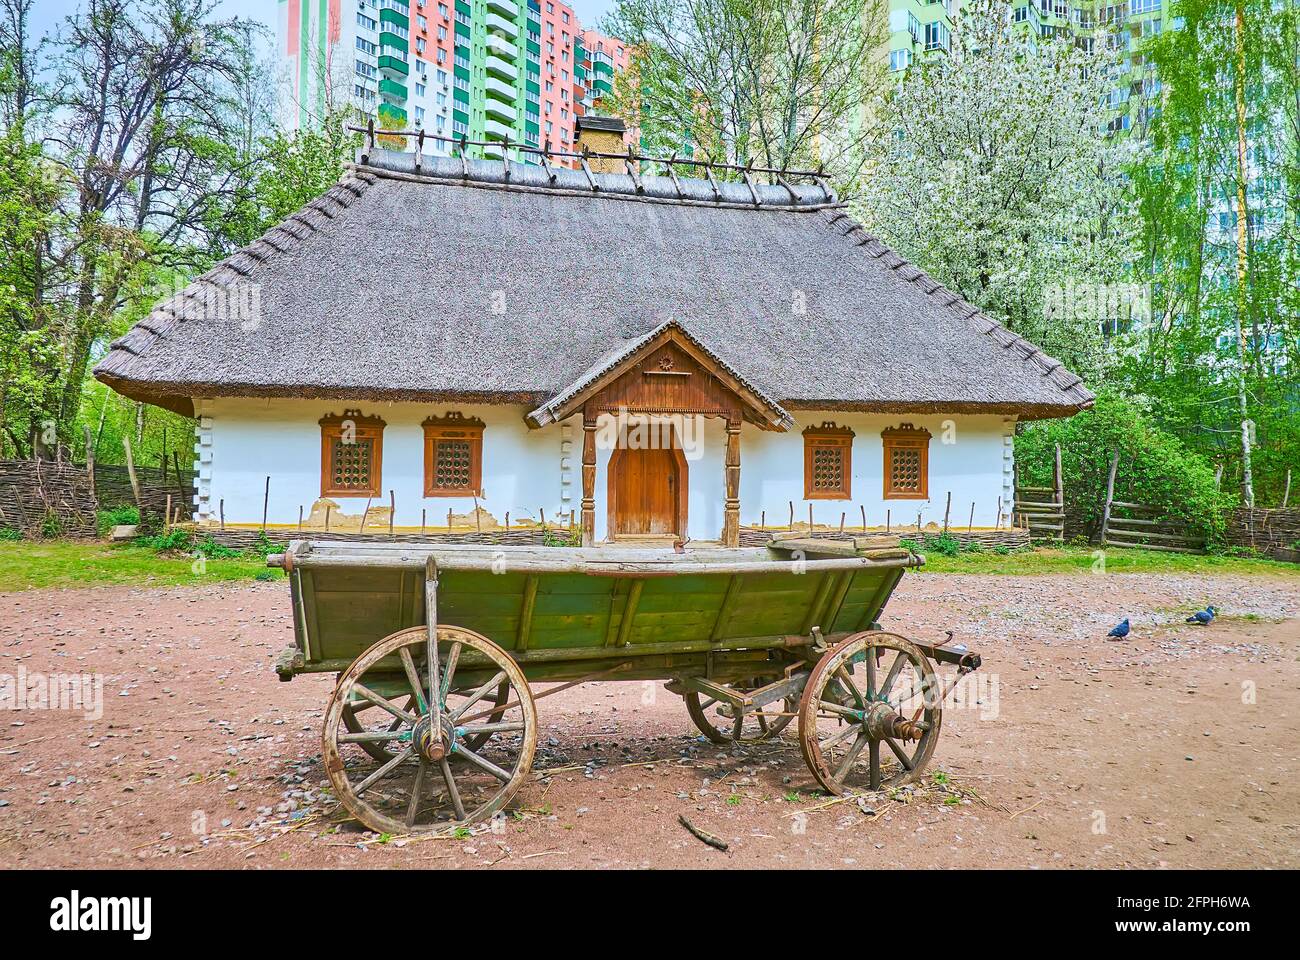 The grounds of historic Churchwarden's estate with whitewashed house and the old wooden cart, located in Mamajeva Sloboda Cossack Village scansen, Kyi Stock Photo